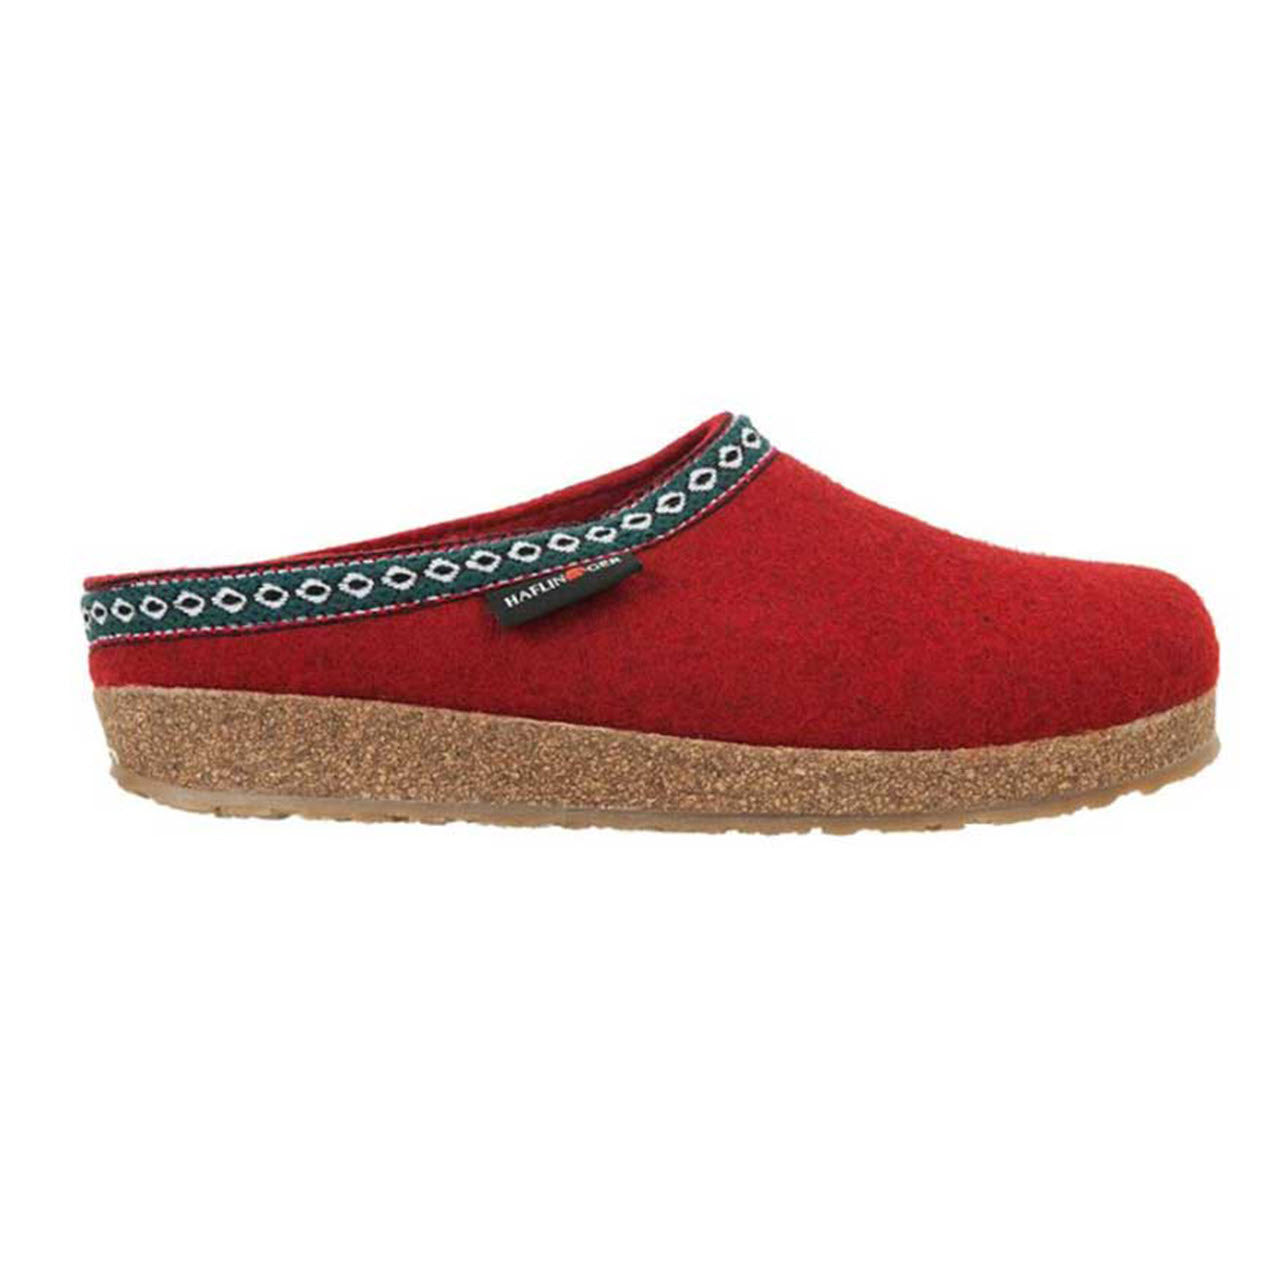 Red Haflingers clog with decorative trim and boiled wool felt on a white background.